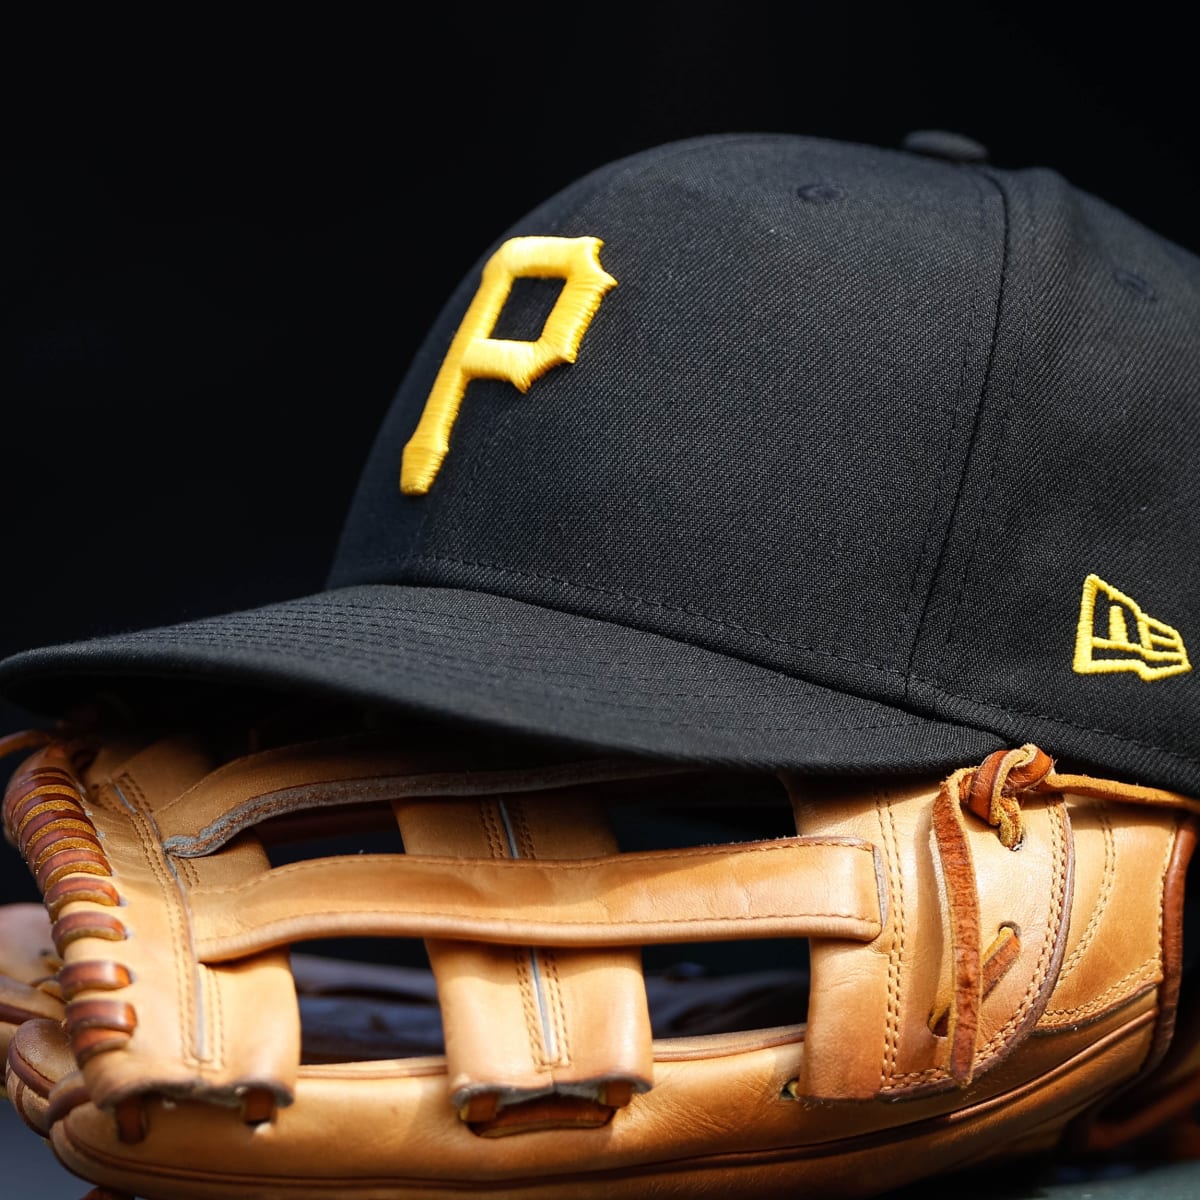 Longtime minor leaguer Drew Maggi gets promotion to Pirates at age 33